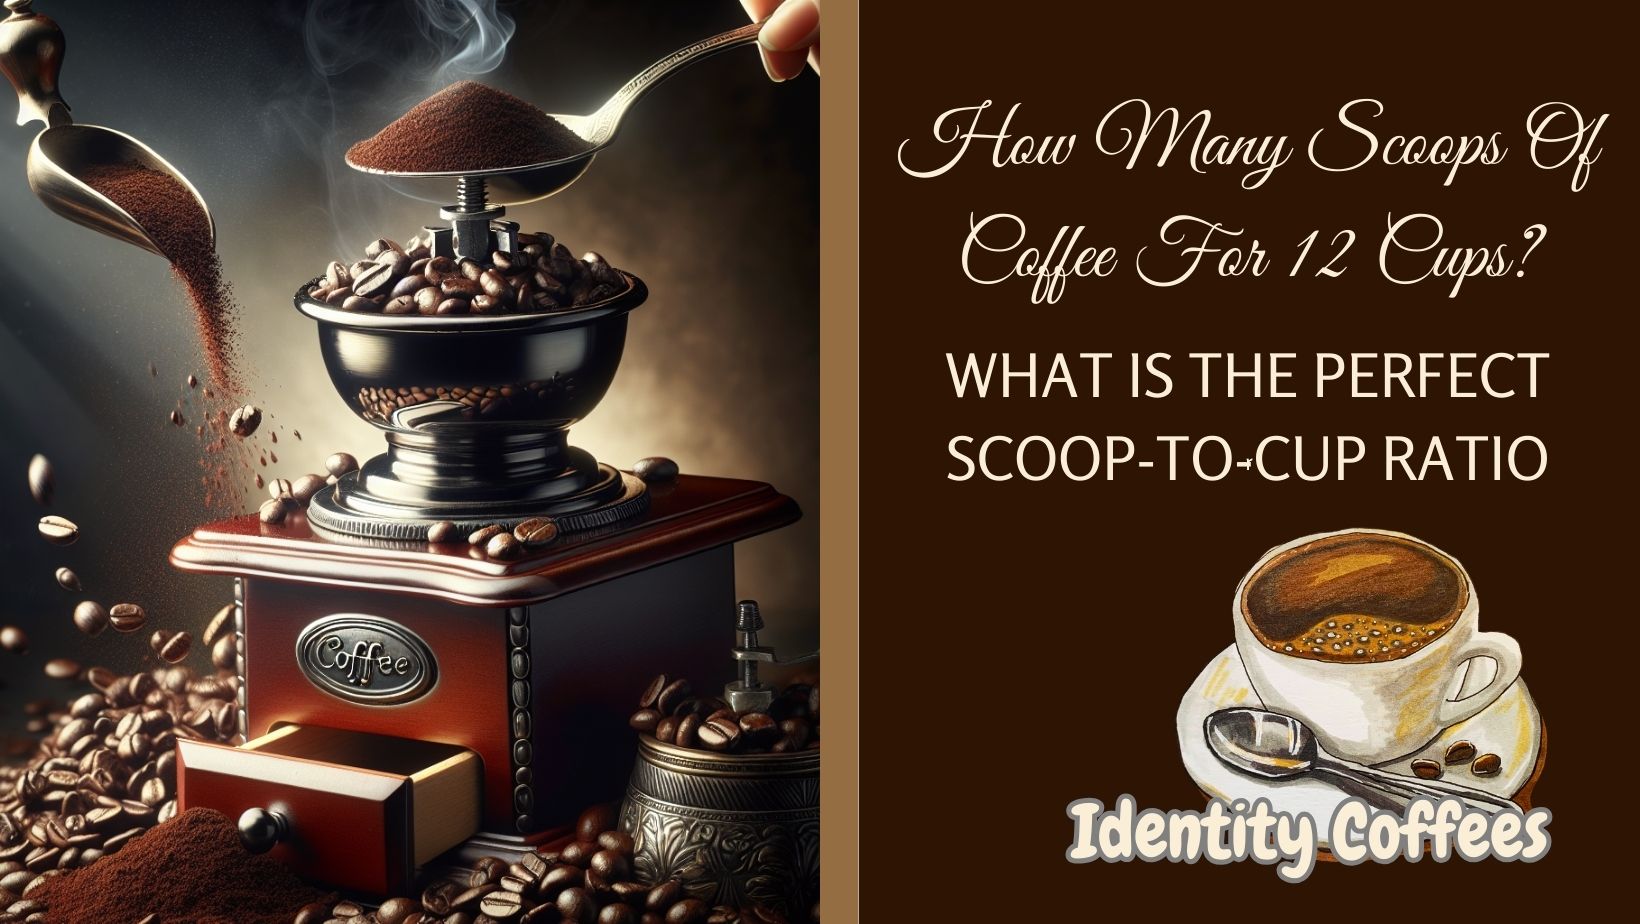 Perfect Scoop-to-Cup Ratio: How Many Scoops Of Coffee For 12 Cups